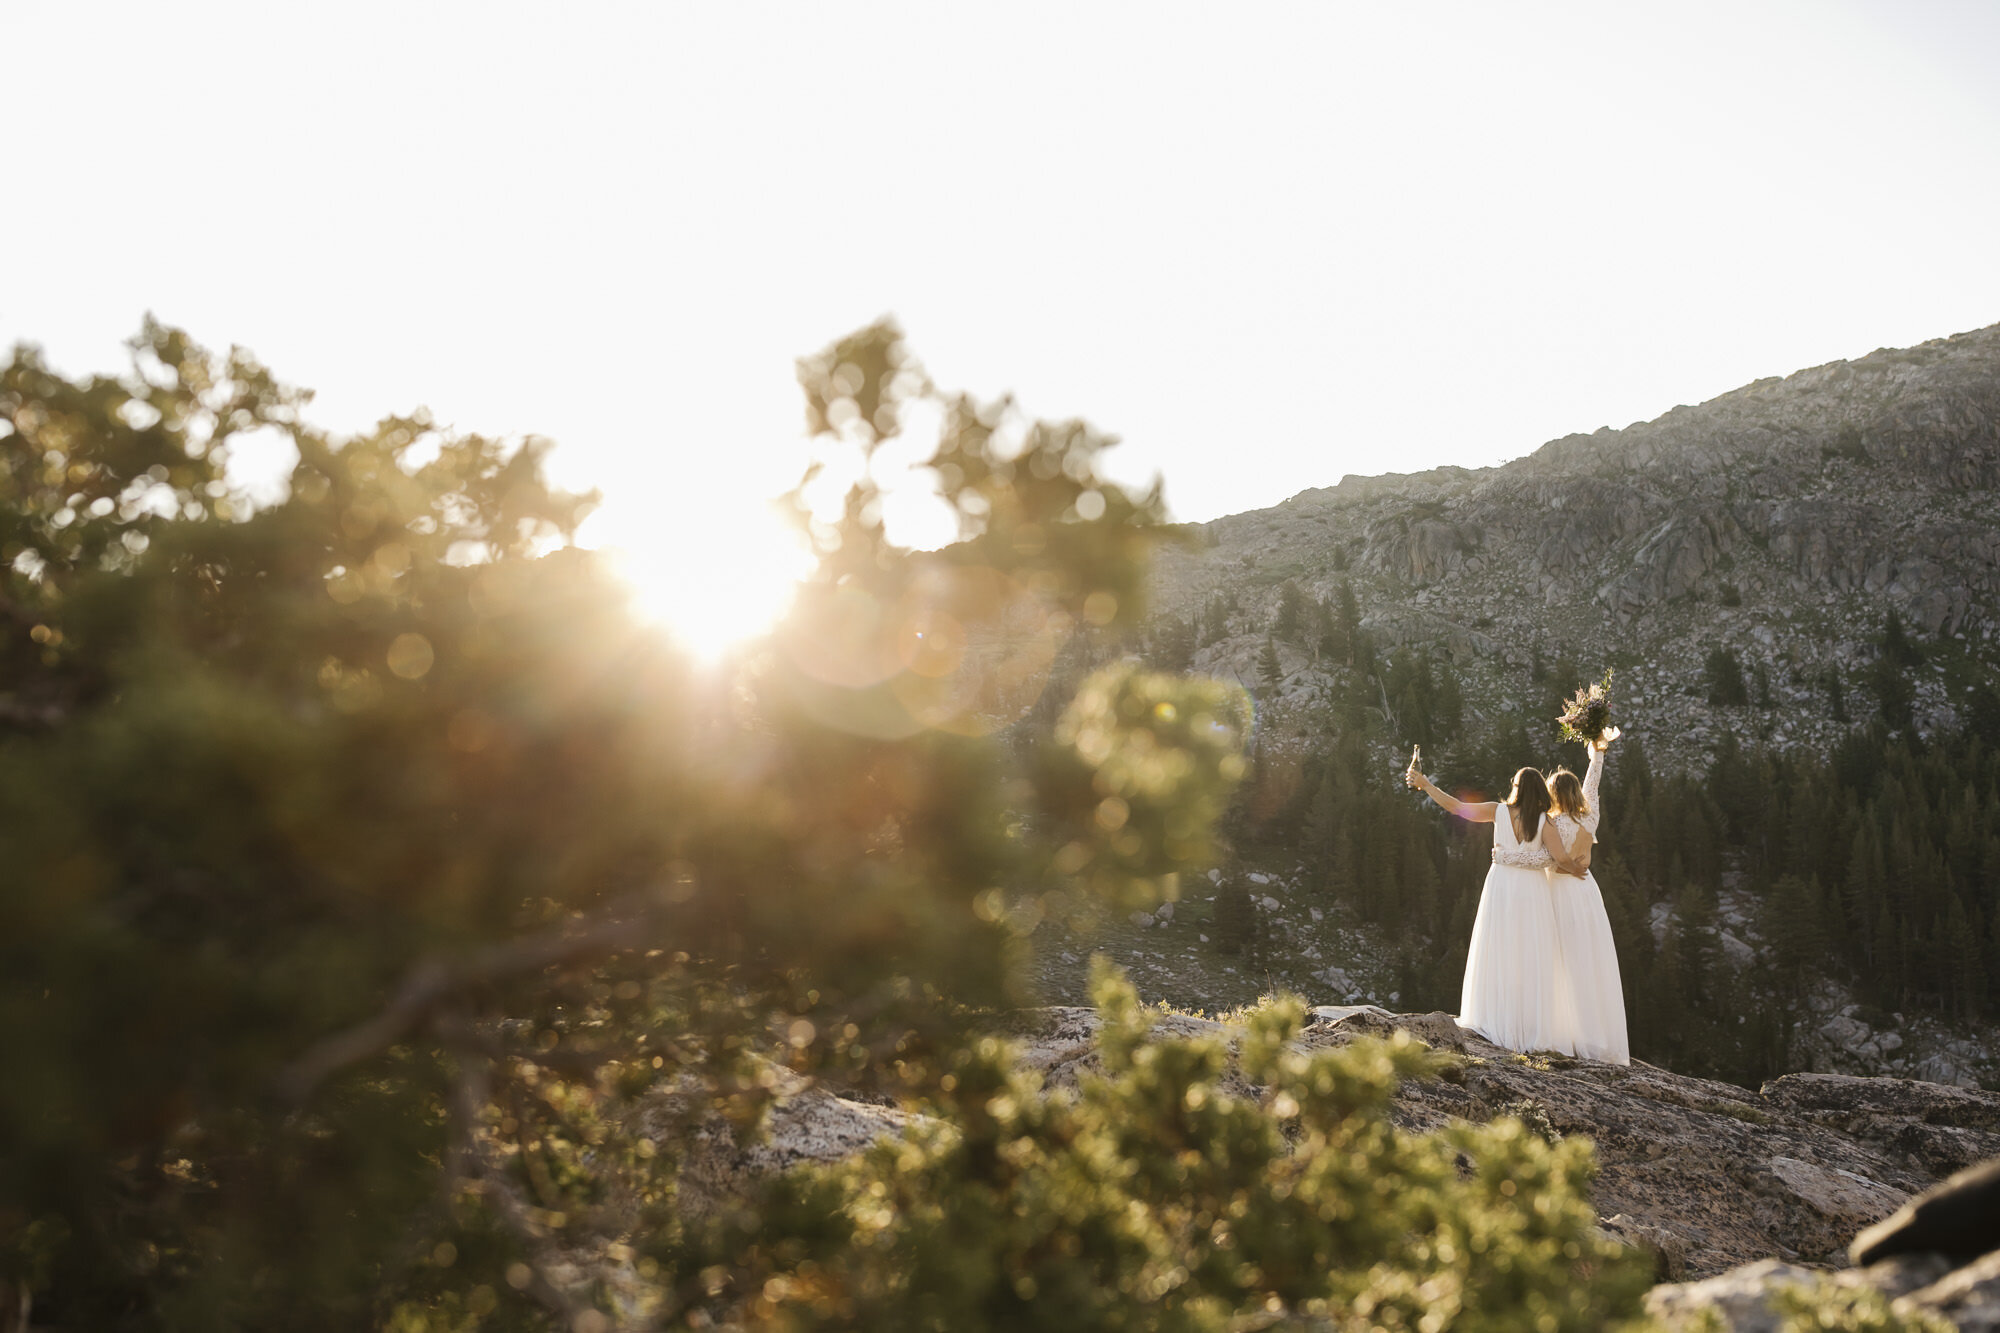 Wedding couple raises their arms in celebration at sunrise during their backpacking elopement